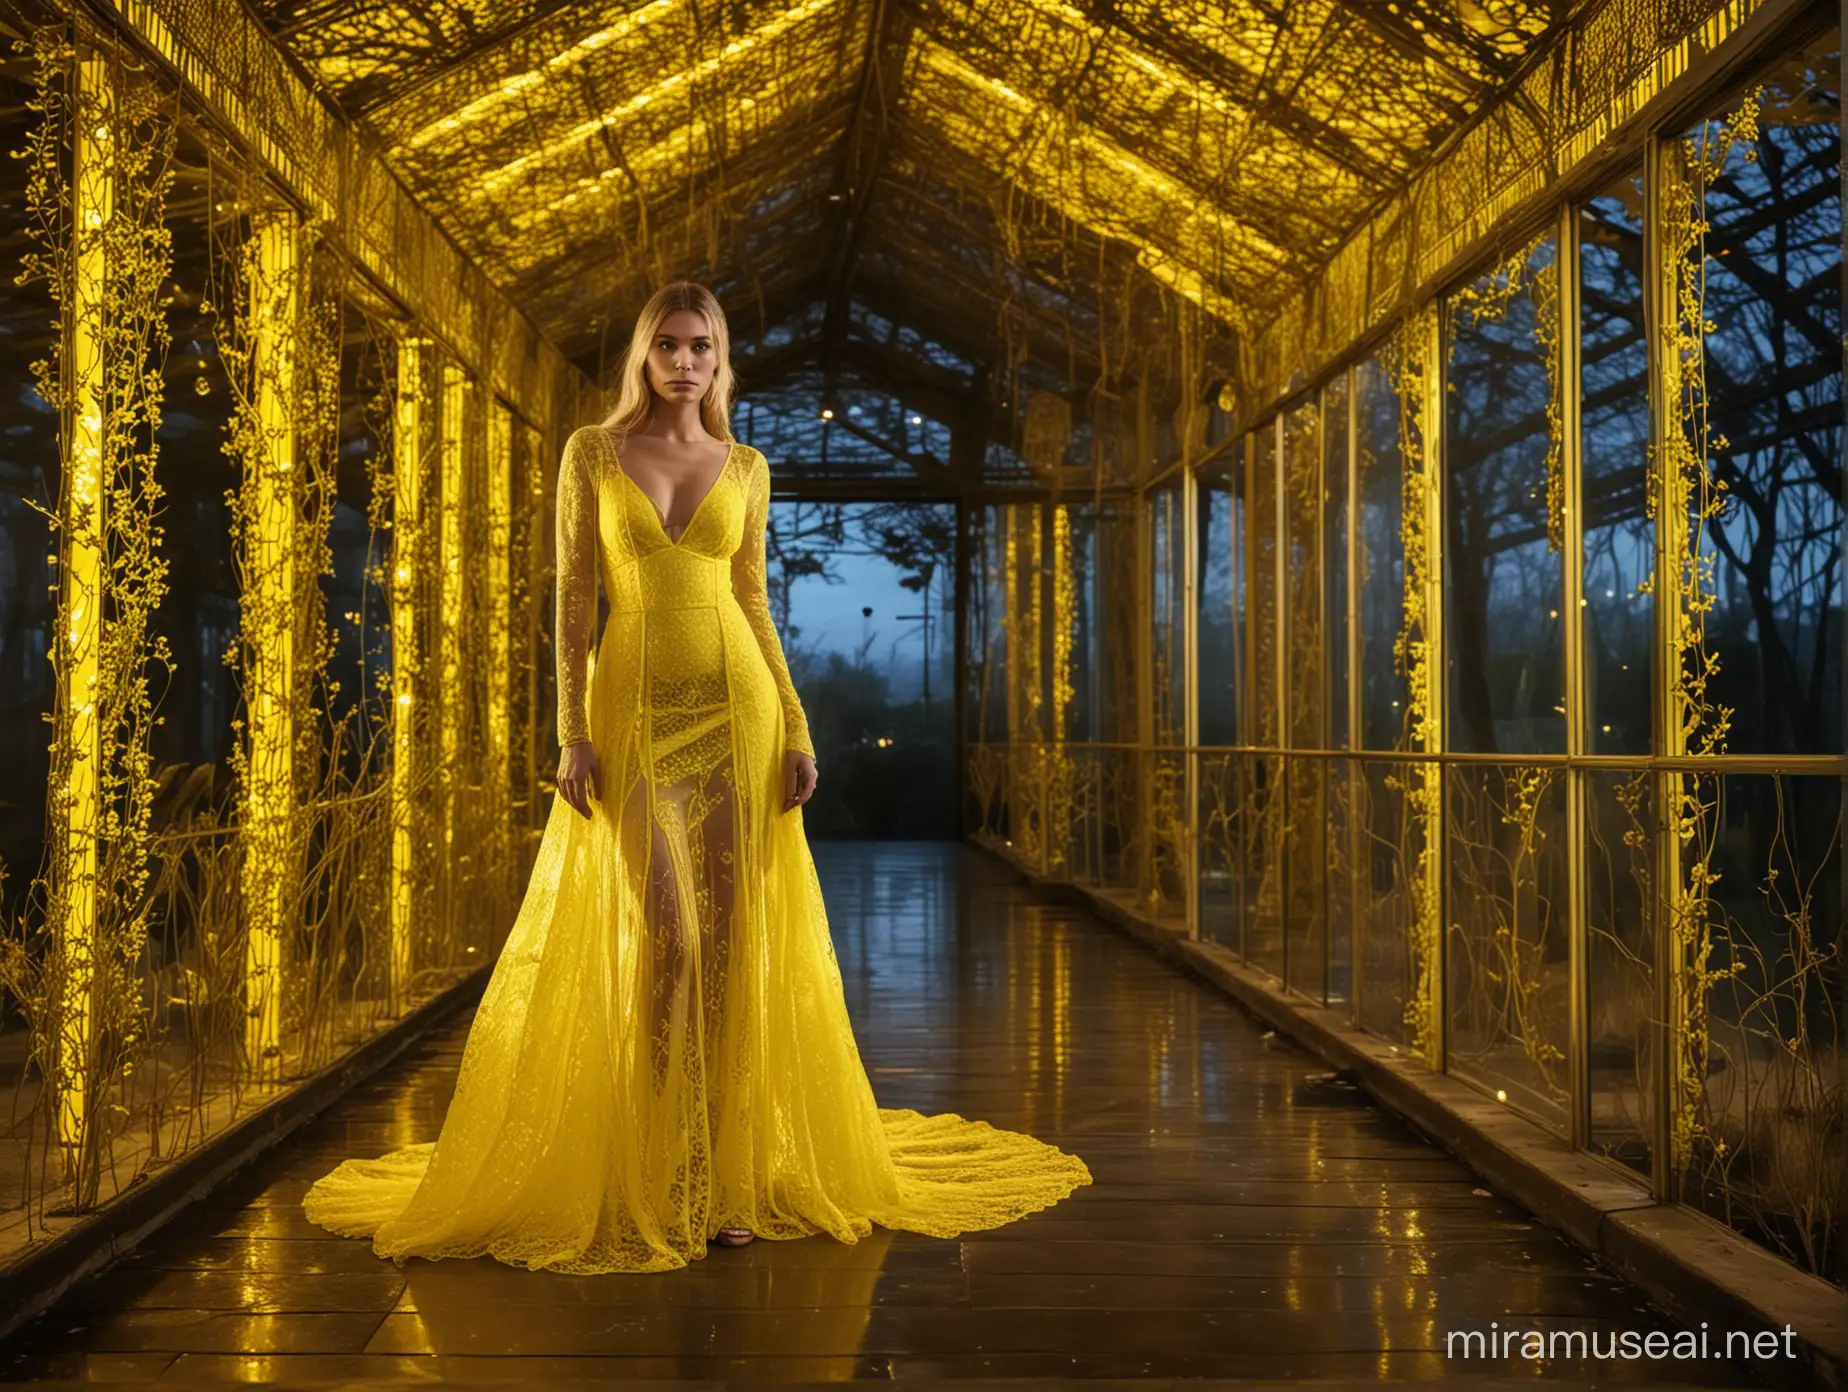 Glamorous Yellow Lace Gown Model with Neon Lights in a Glass House